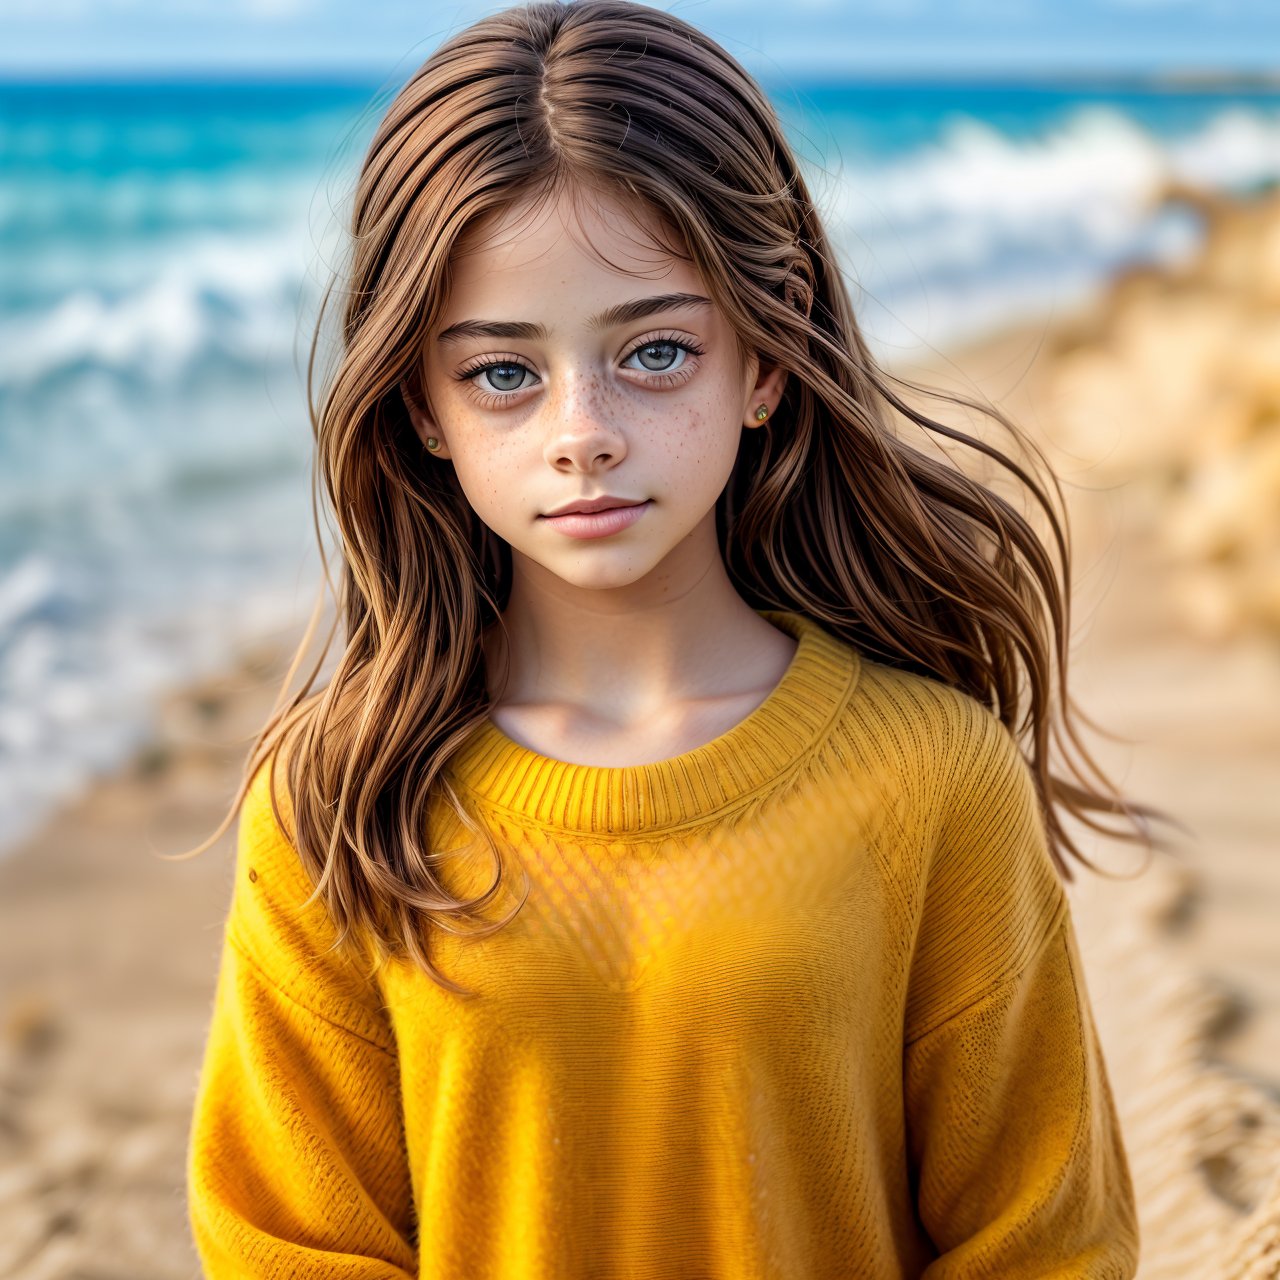 (masterpiece:1.3), best quality looking back, portrait of self-assurance (AIDA_LoRA_RiWo:1.15) <lora:AIDA_LoRA_RiWo:0.99> in (simple yellow sweater:1.1), [little girl], glossy skin with visible pores and freckles, pretty face, self-assurance, cinematic, hyper realistic, kkw-ph1, (colorful:1.1), (on the seashore:1.1), sea, sand, sky, (on the beach:1.1), sunlight, outdoors